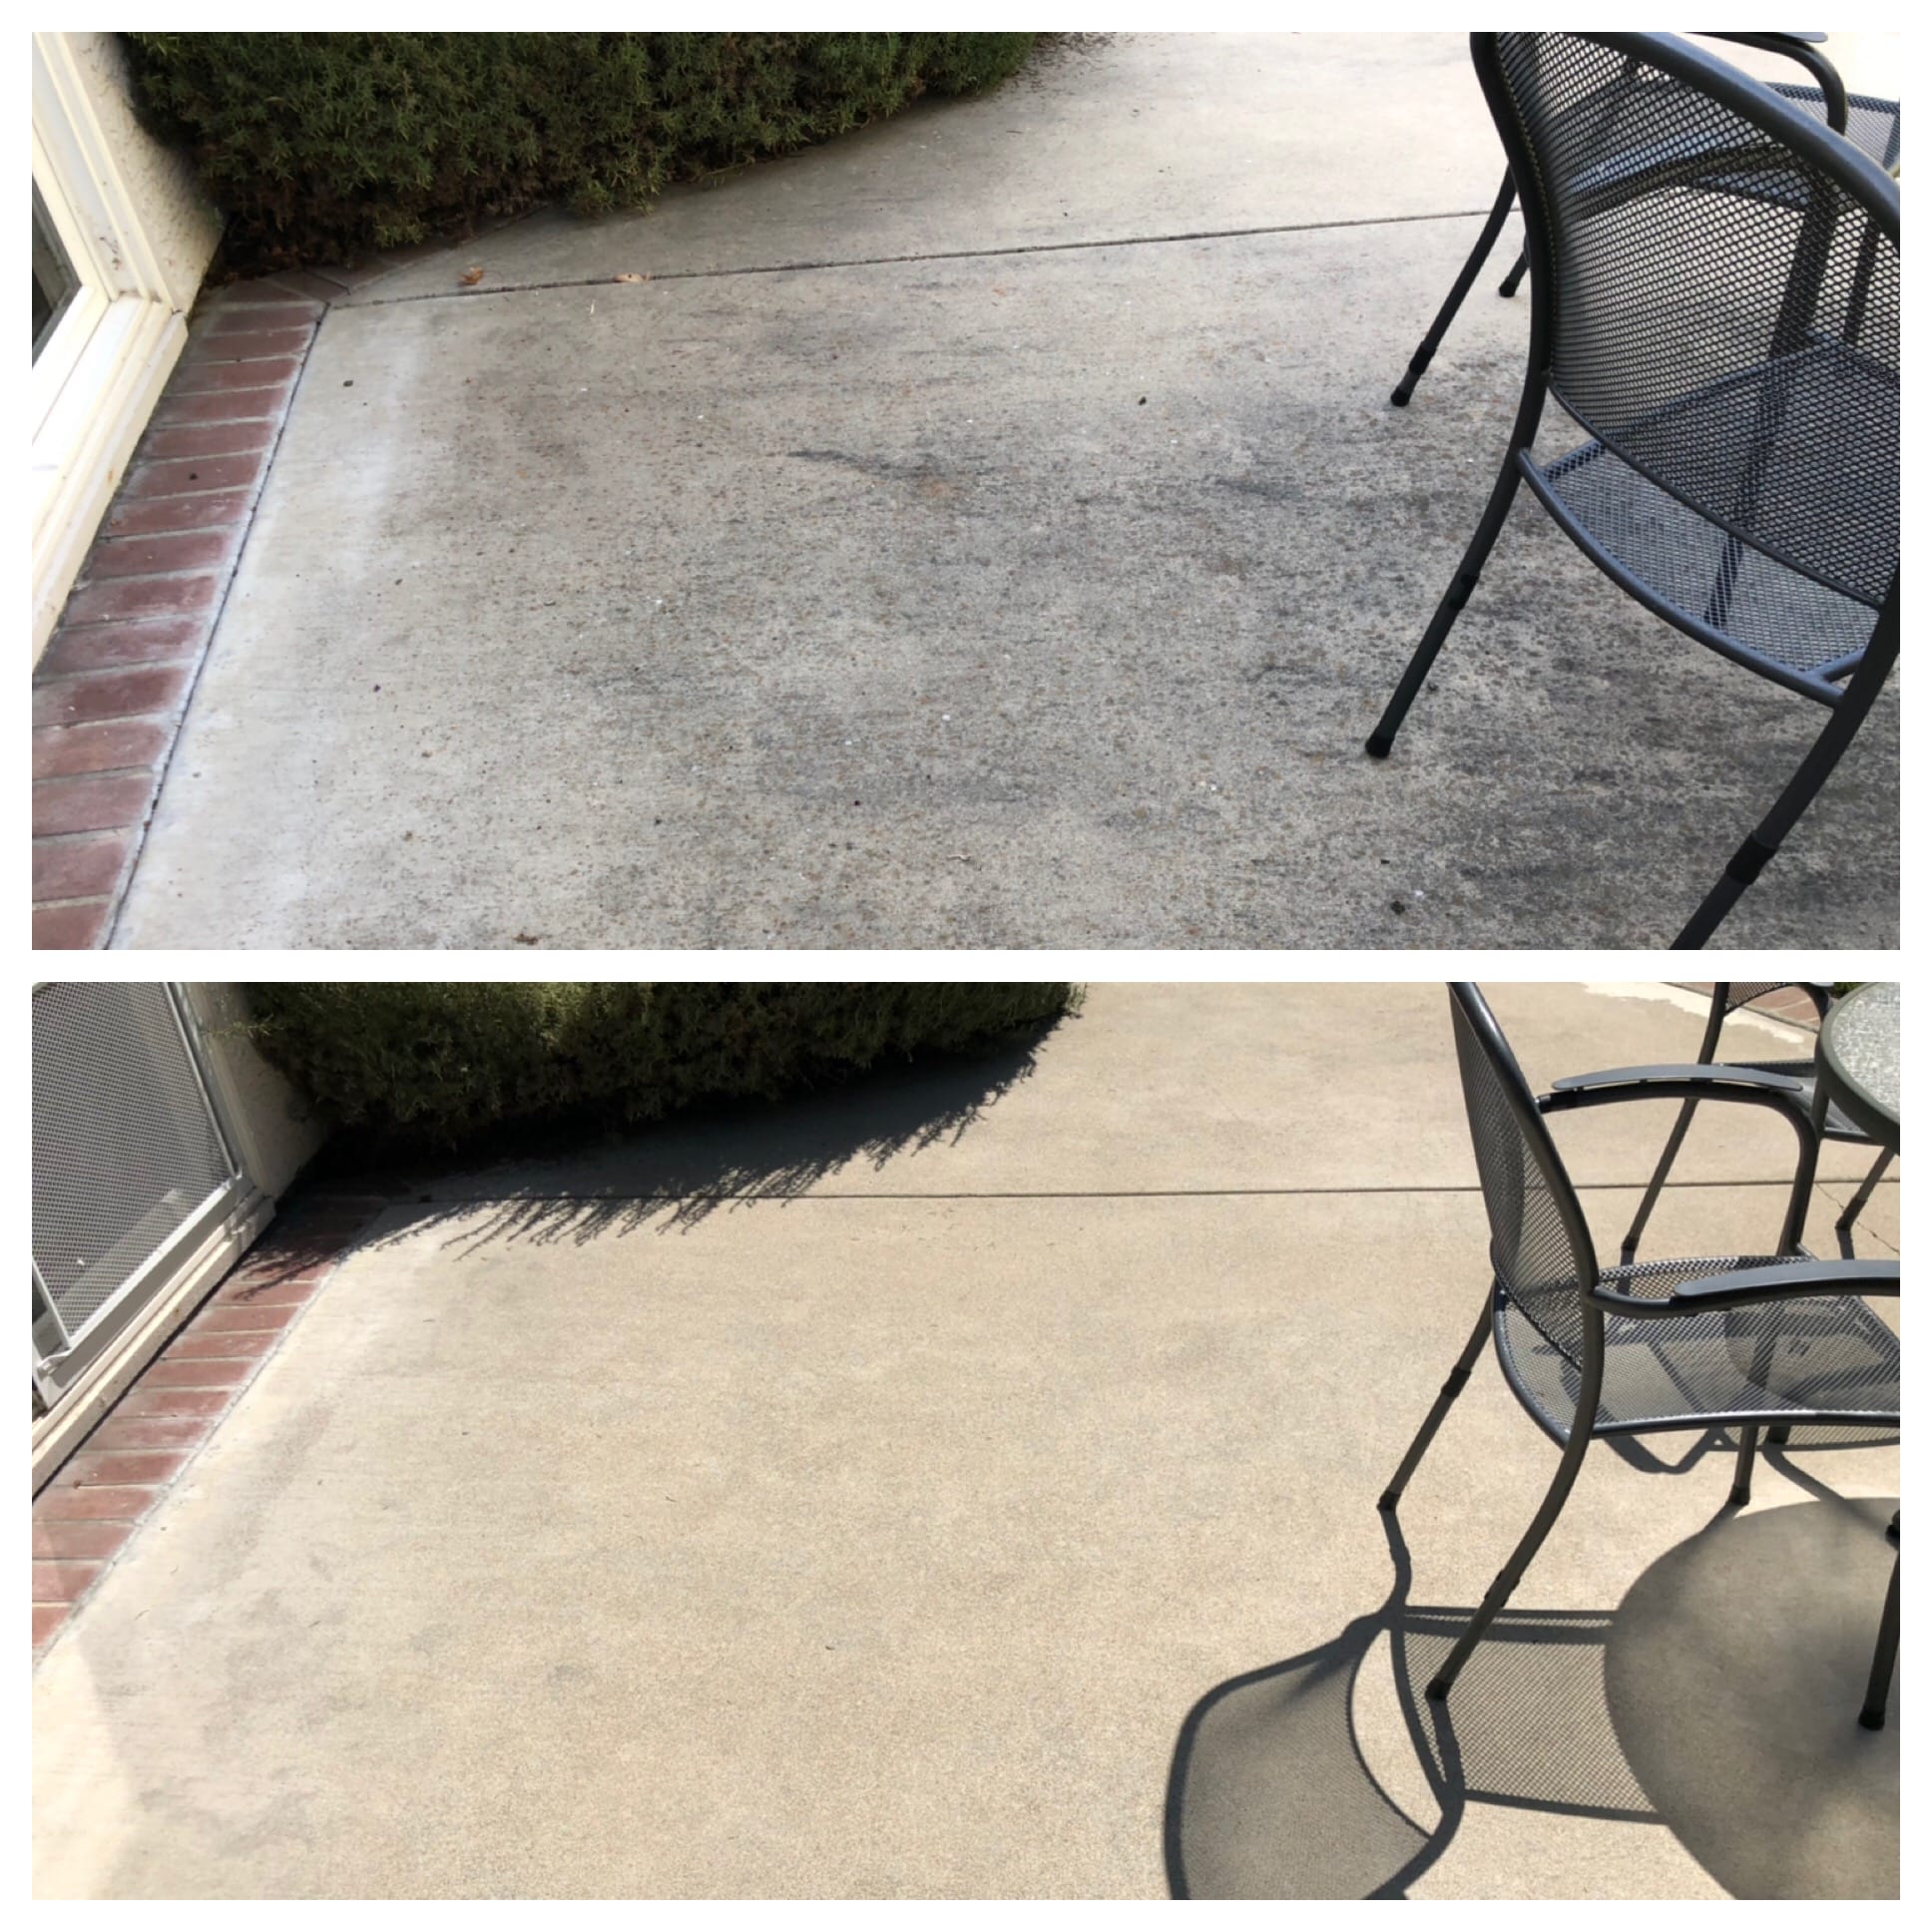 Patio Cleaning in Sacramento, CA